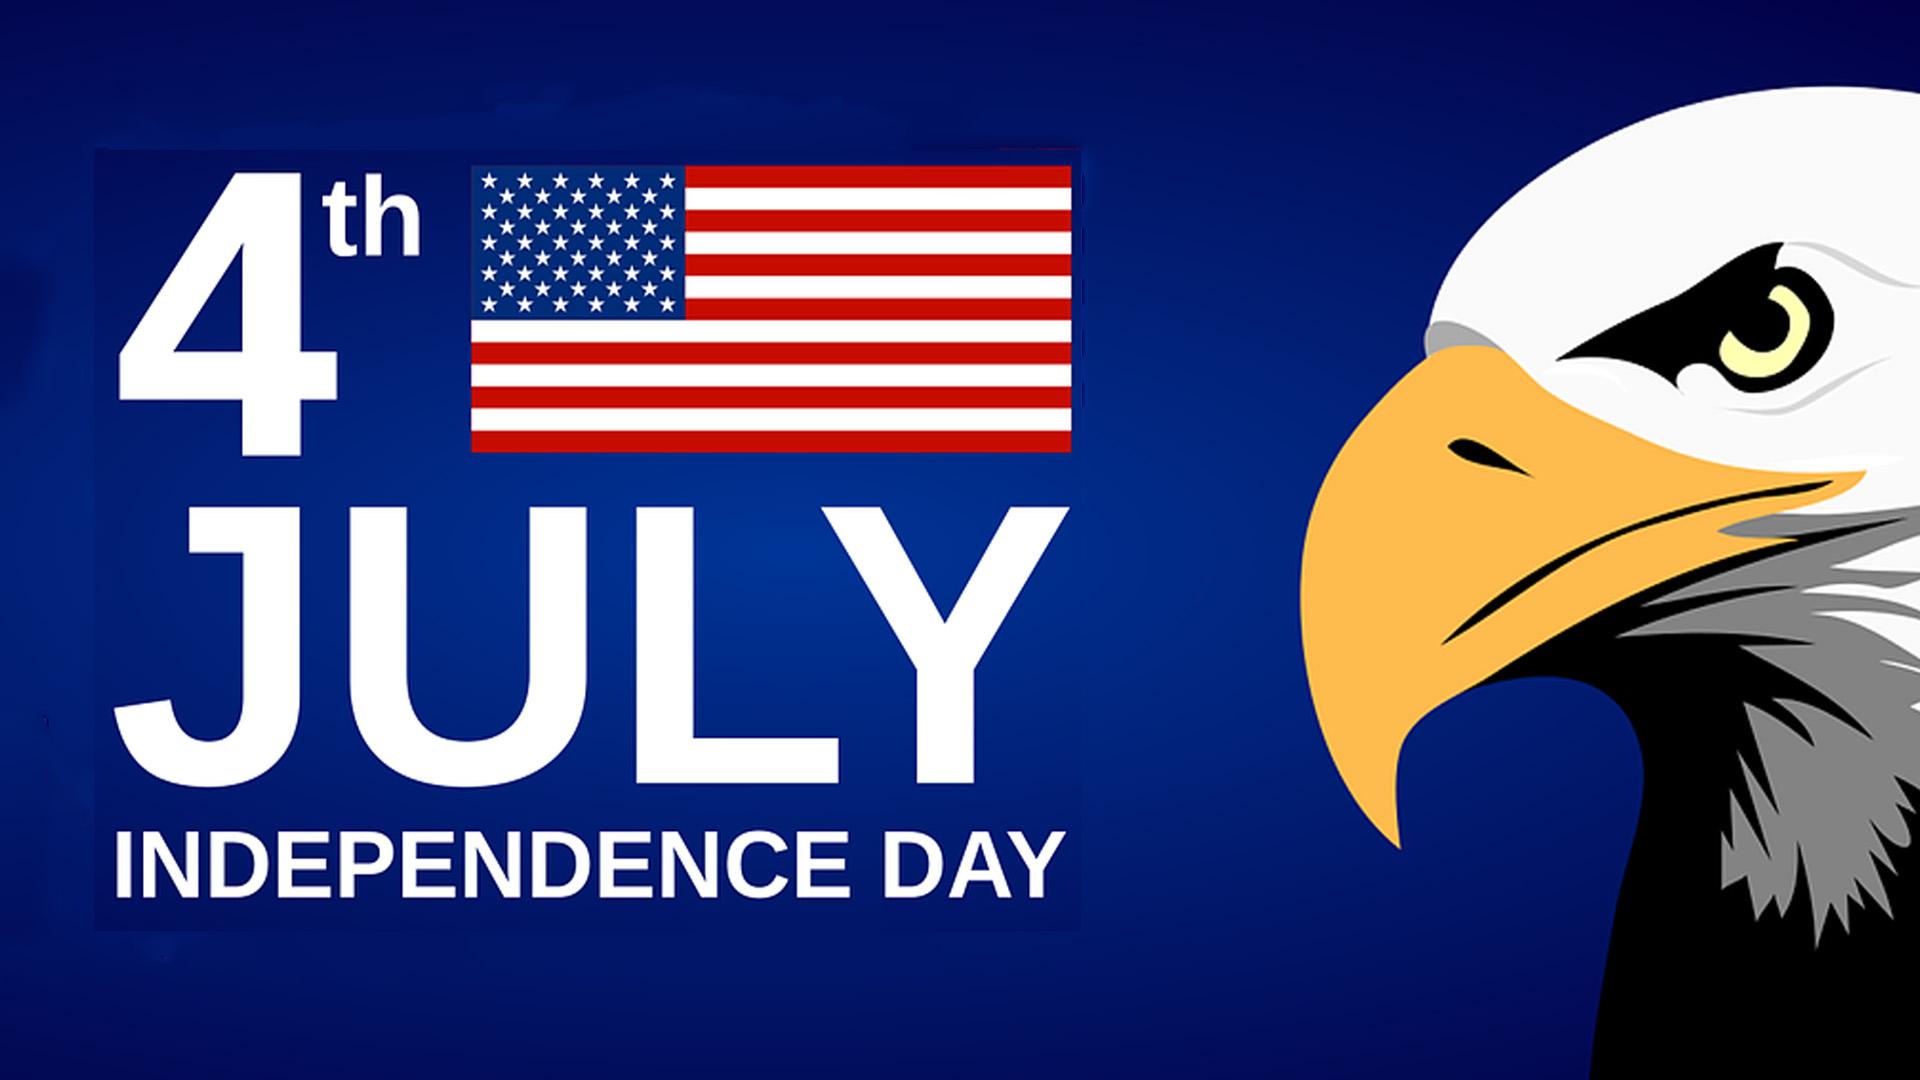 Navy blue gradient background. 4th [USA FLAG] July Independence Day is written in bold white font stacked on top one another. There is a animated eagle on the right of the graphic with a profile view of his face.